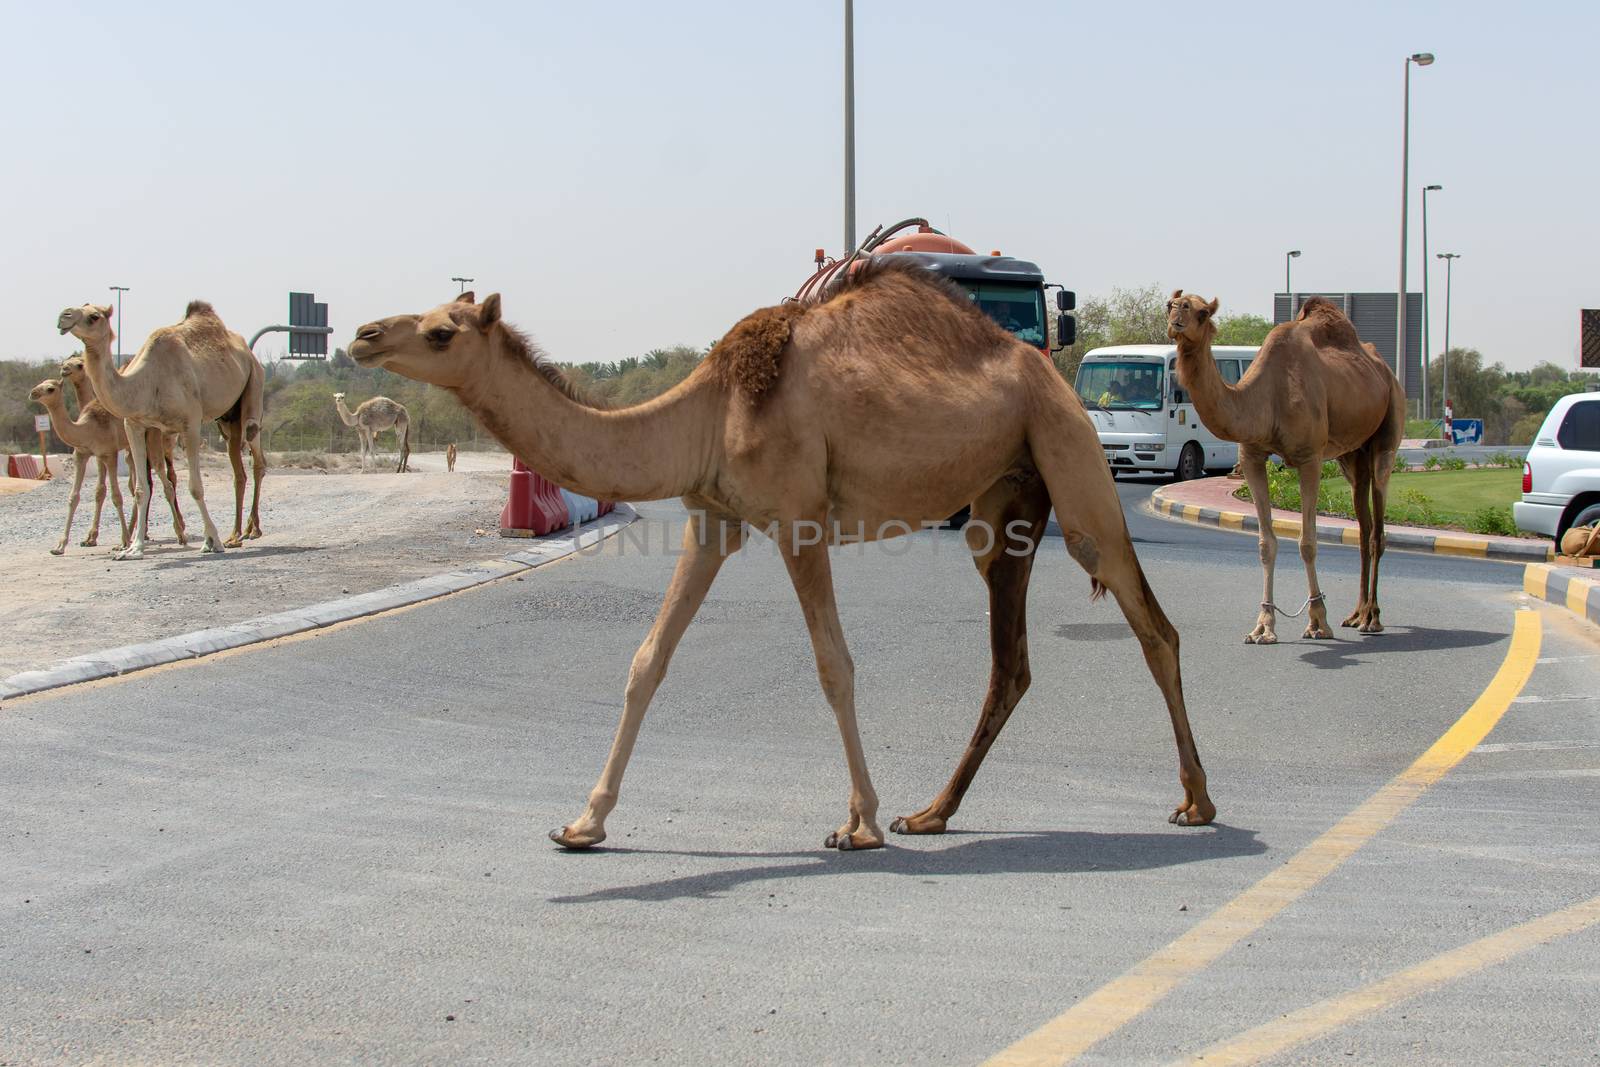 A group of camels cross the Middle Eastern Road while cars wait by kingmaphotos